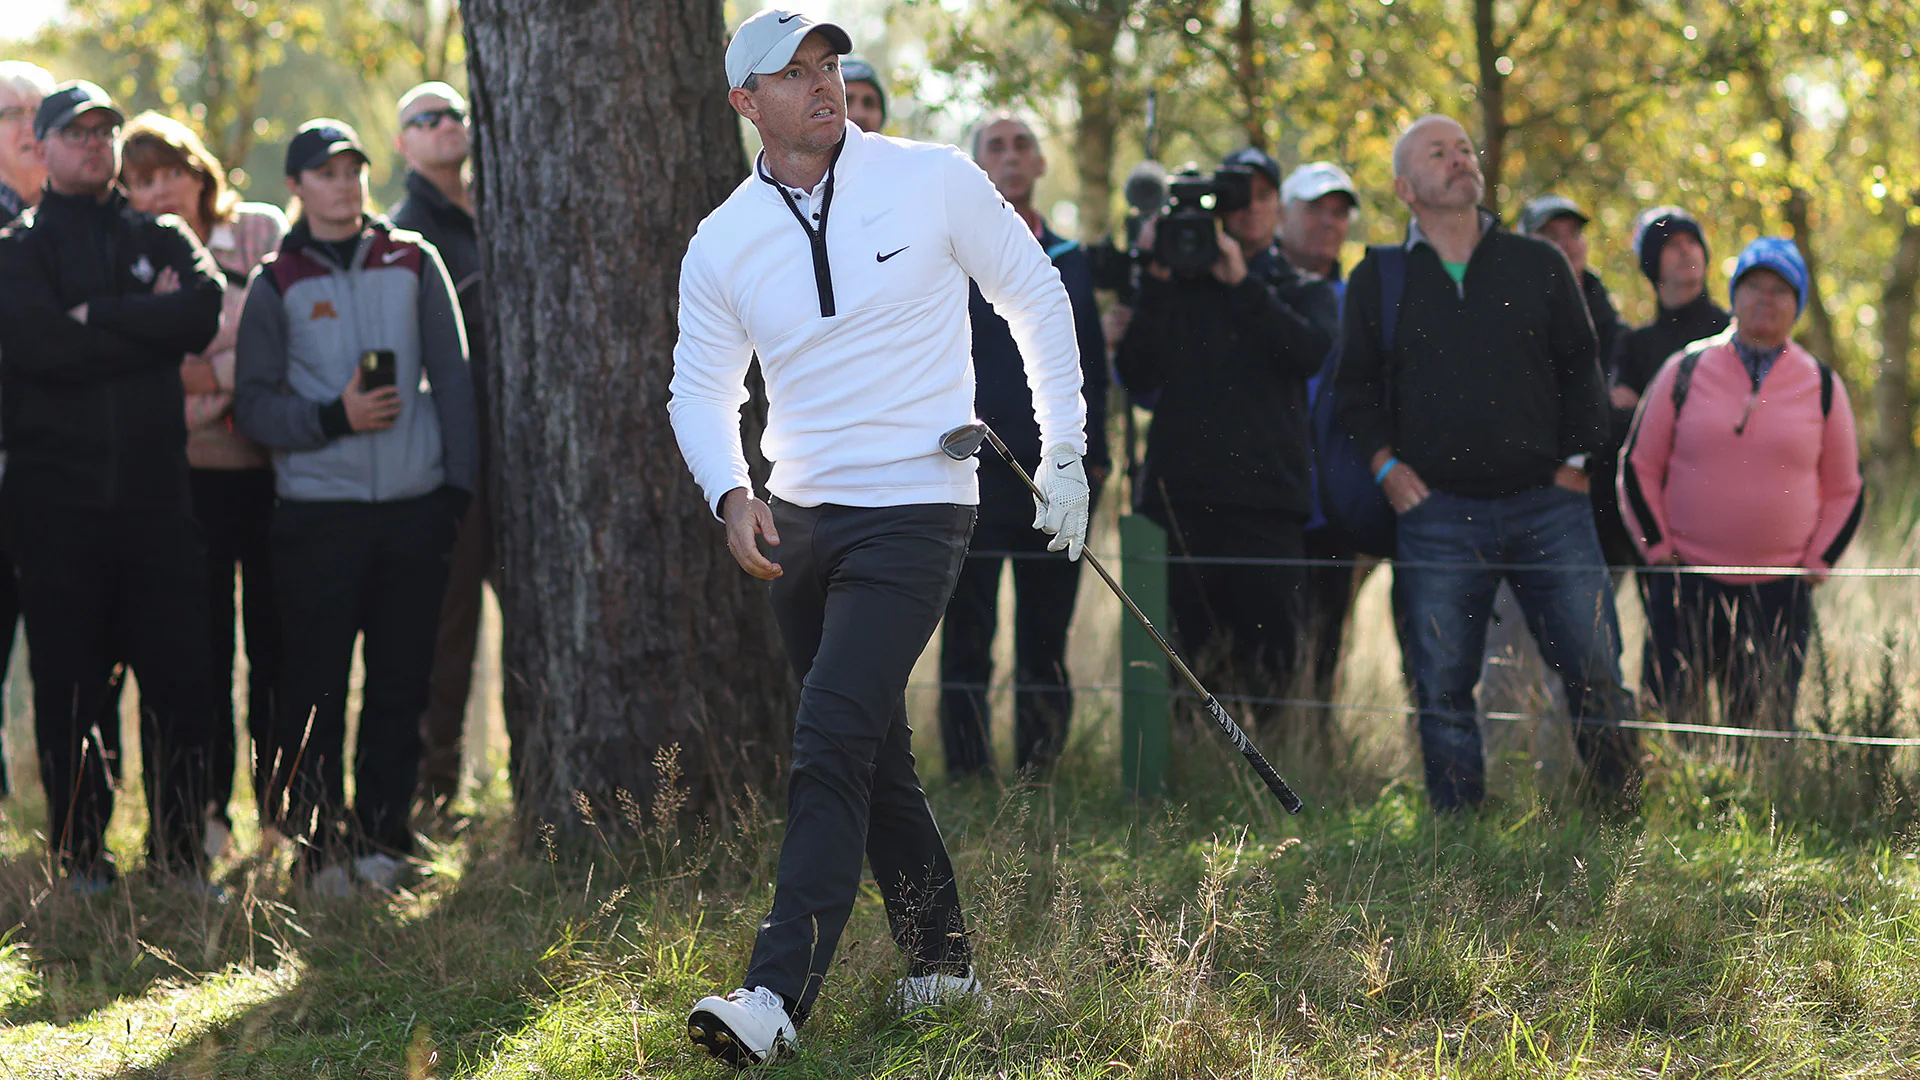 Rory McIlroy starts hot at Carnoustie, cools off in first round of Dunhill Links